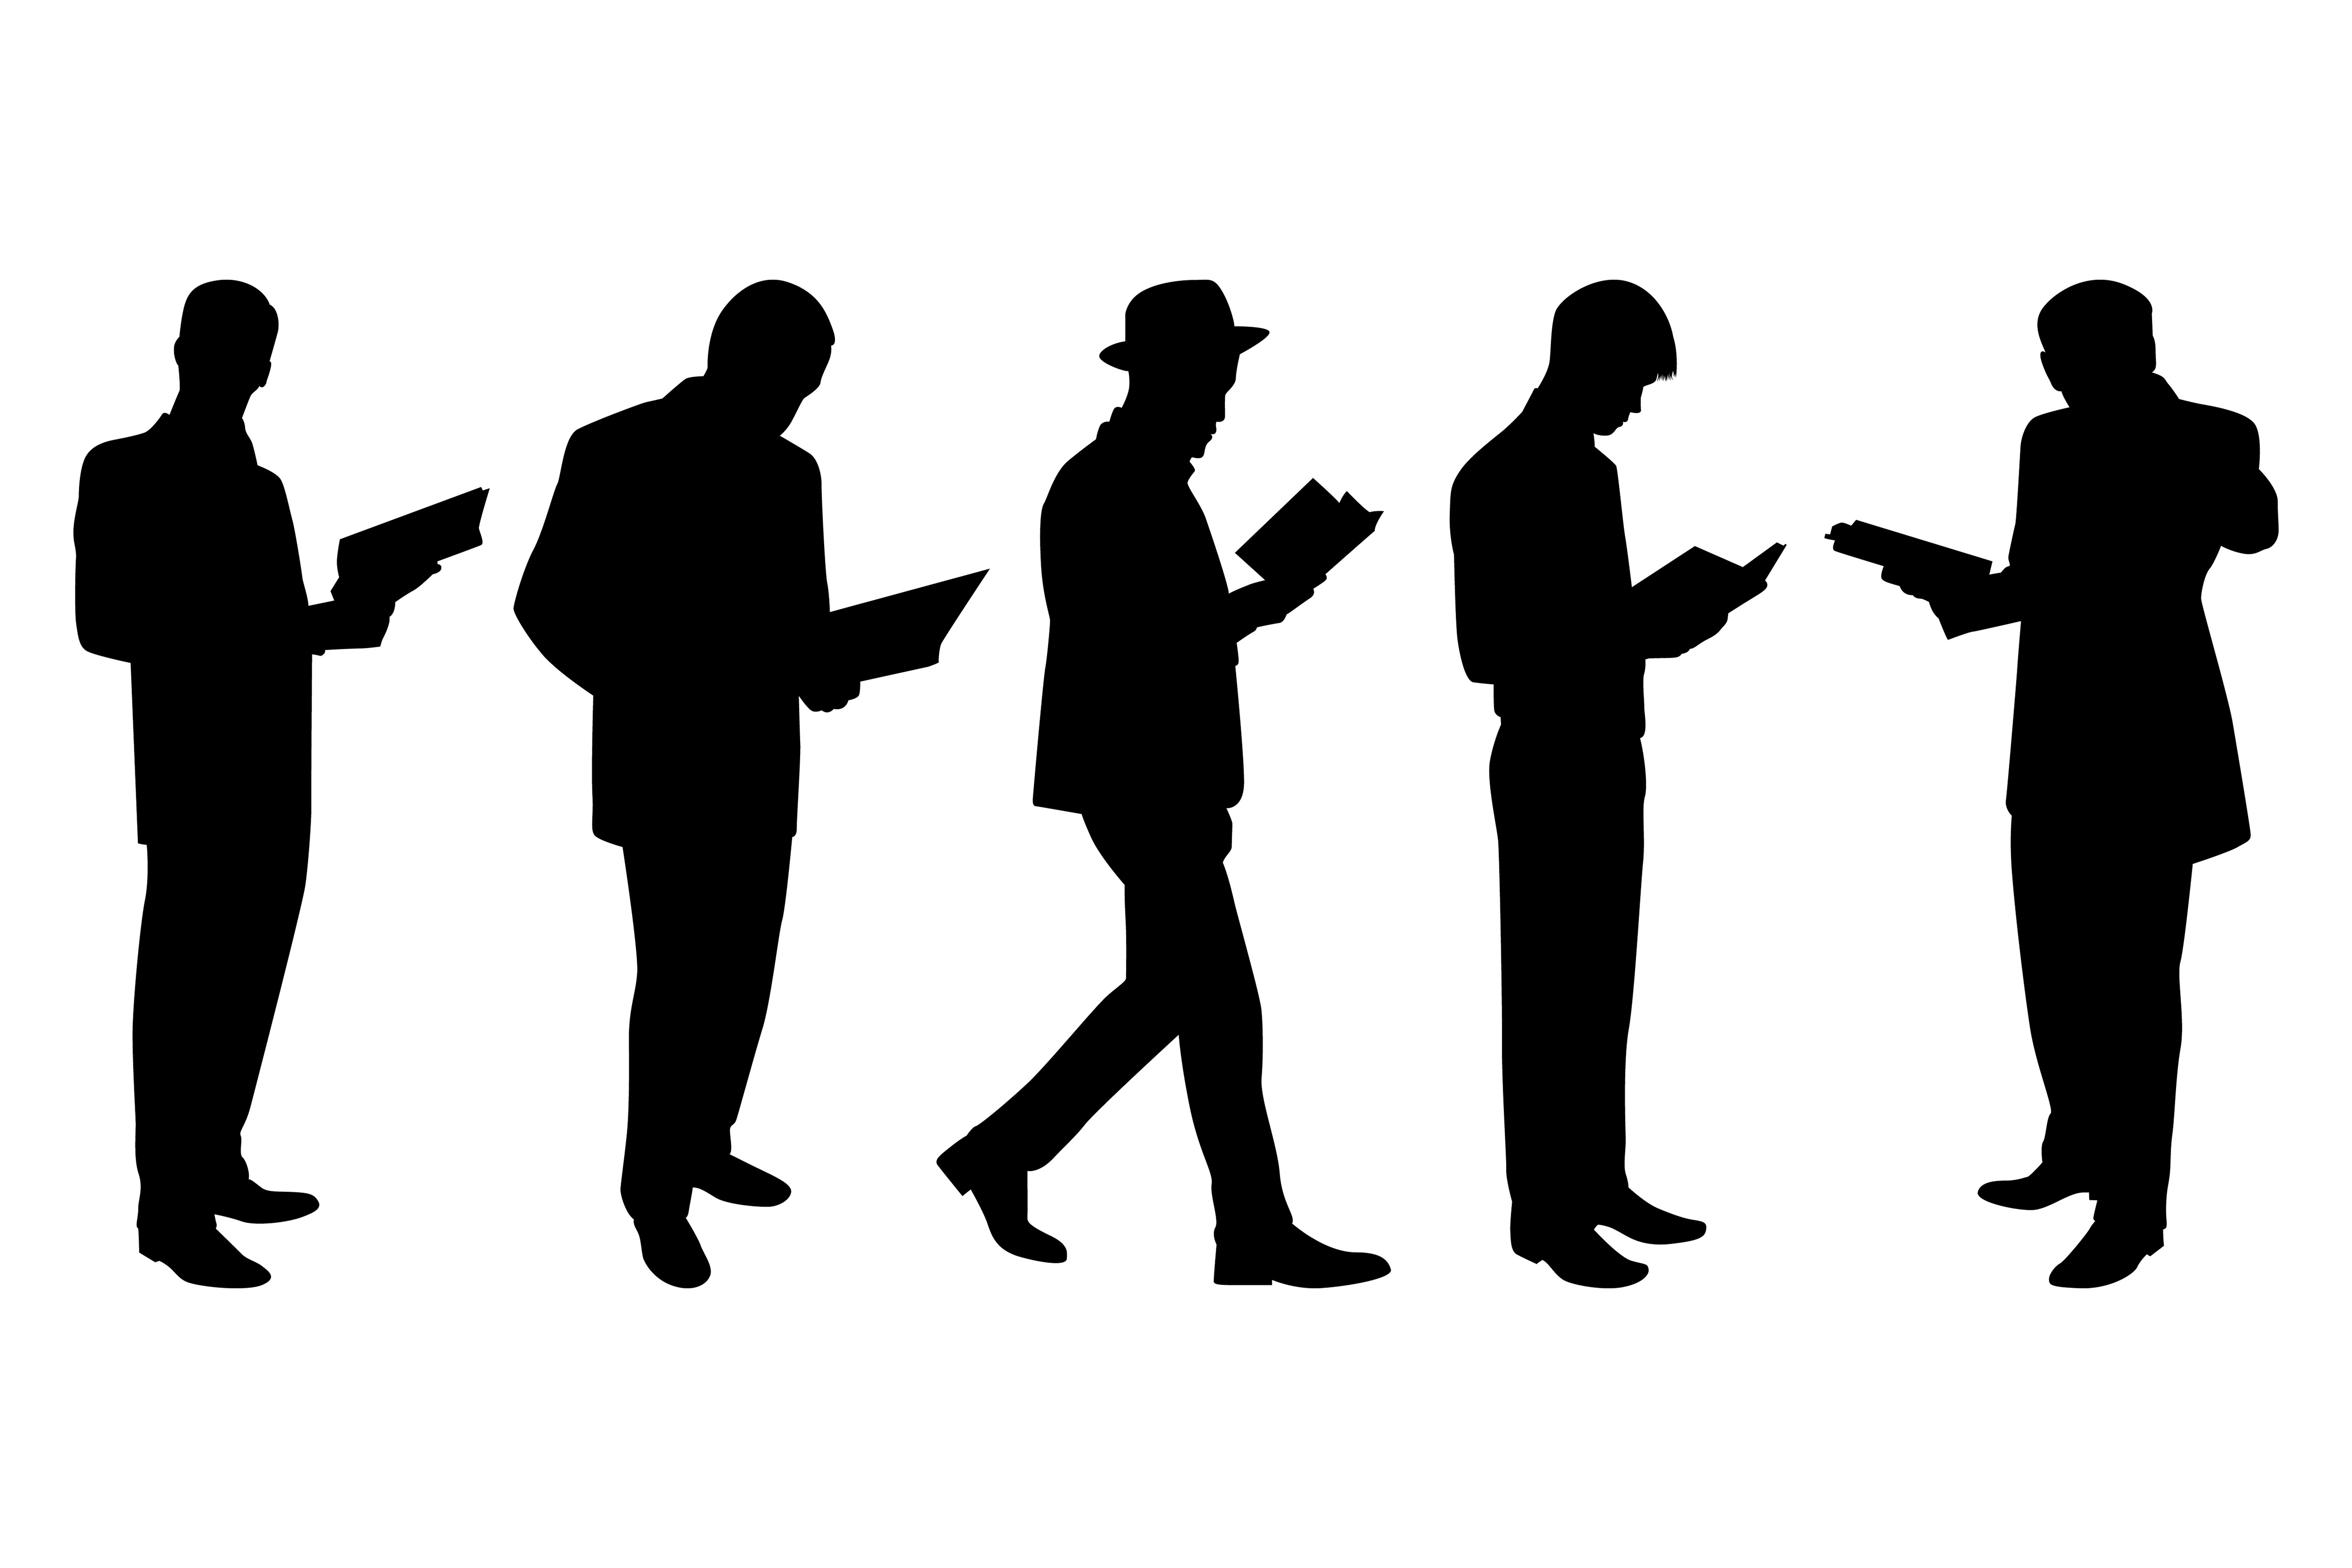 Reading Book Man Silhouettes Vector Graphic by adopik · Creative Fabrica